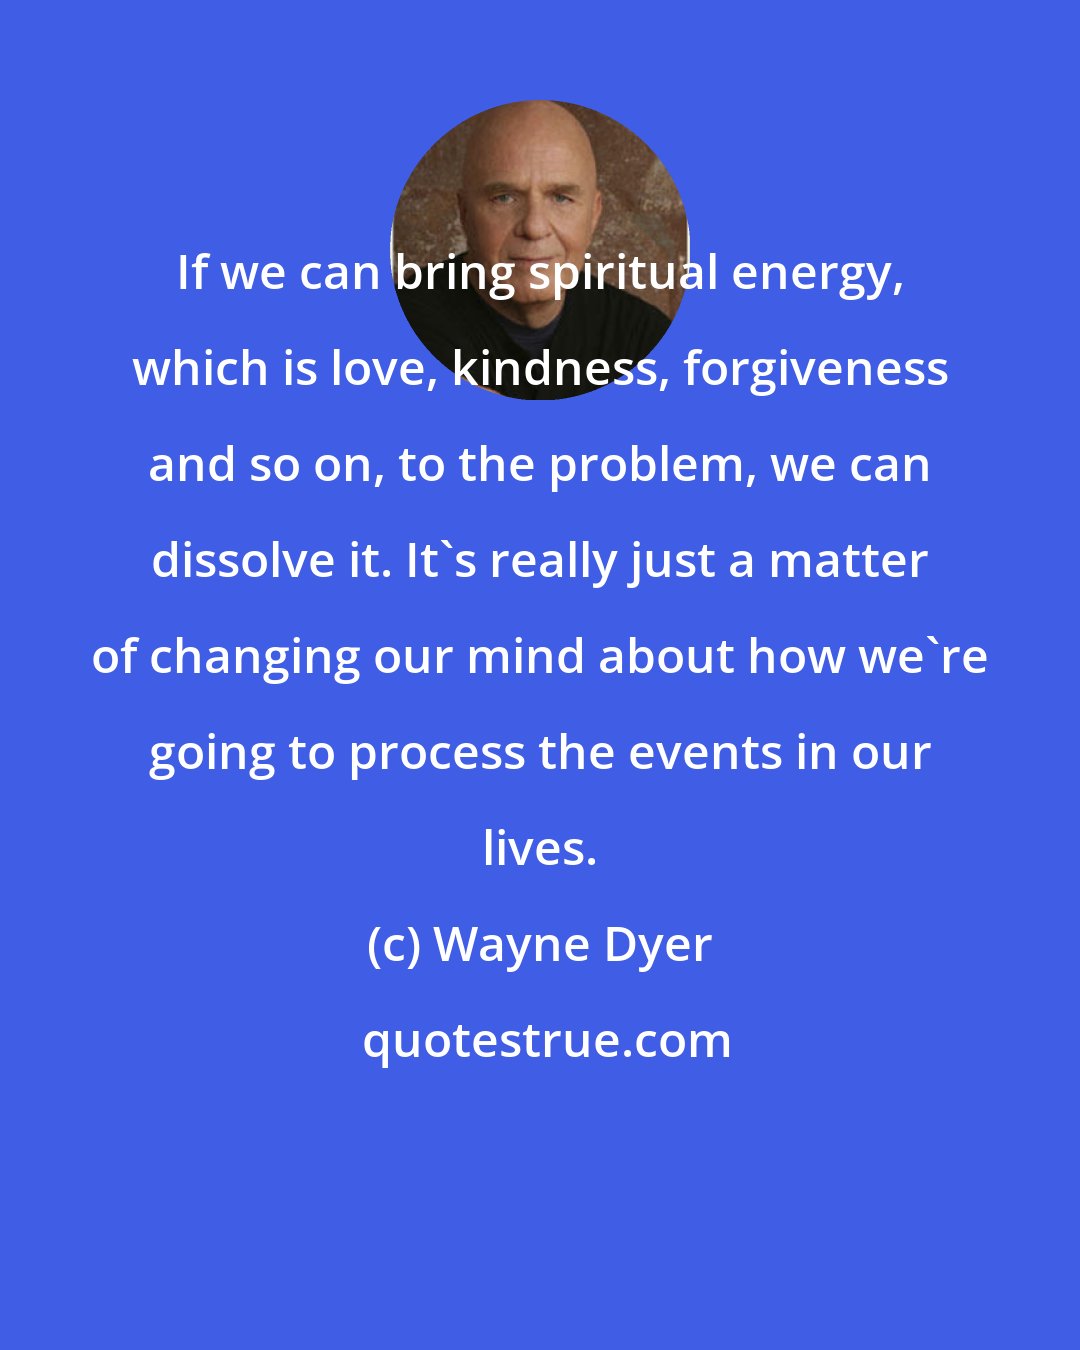 Wayne Dyer: If we can bring spiritual energy, which is love, kindness, forgiveness and so on, to the problem, we can dissolve it. It's really just a matter of changing our mind about how we're going to process the events in our lives.